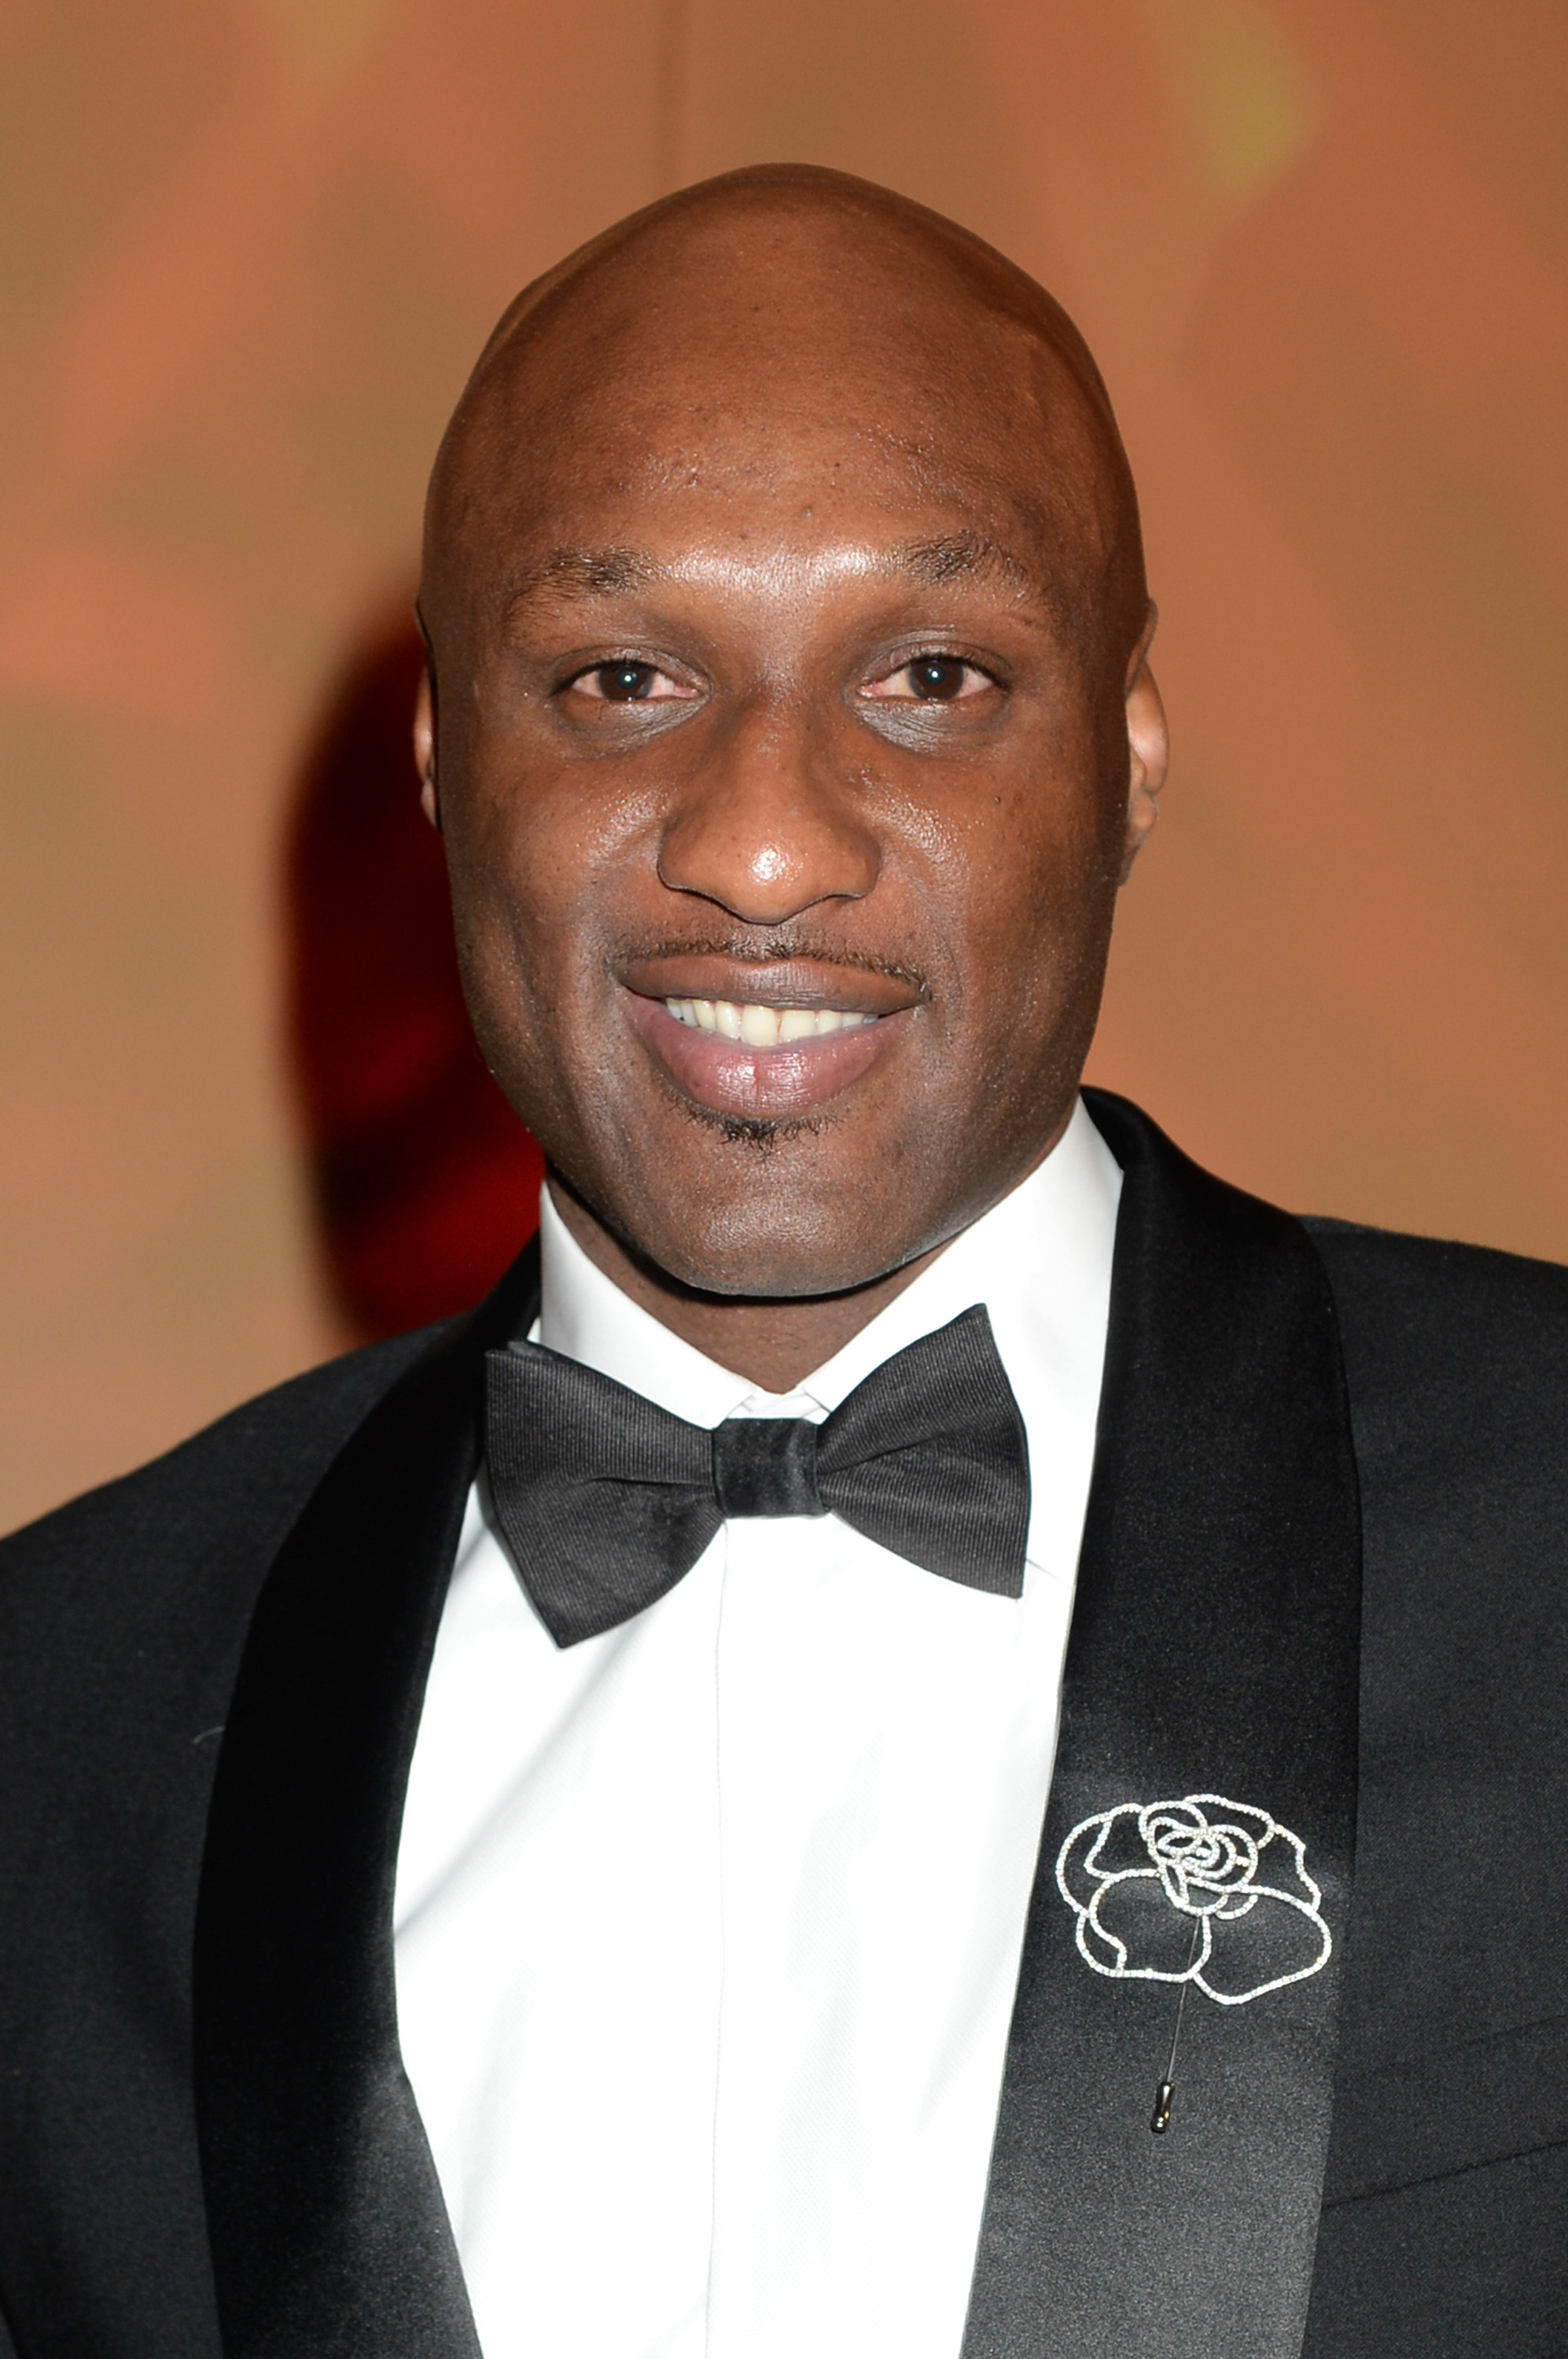 Professional basketball player Lamar Odom attends HBO's Official Golden Globe Awards After Party at The Beverly Hilton Hotel in Beverly Hills, Calif., on Jan. 12, 2014 (Jeff Kravitz—FilmMagic/Getty Images)